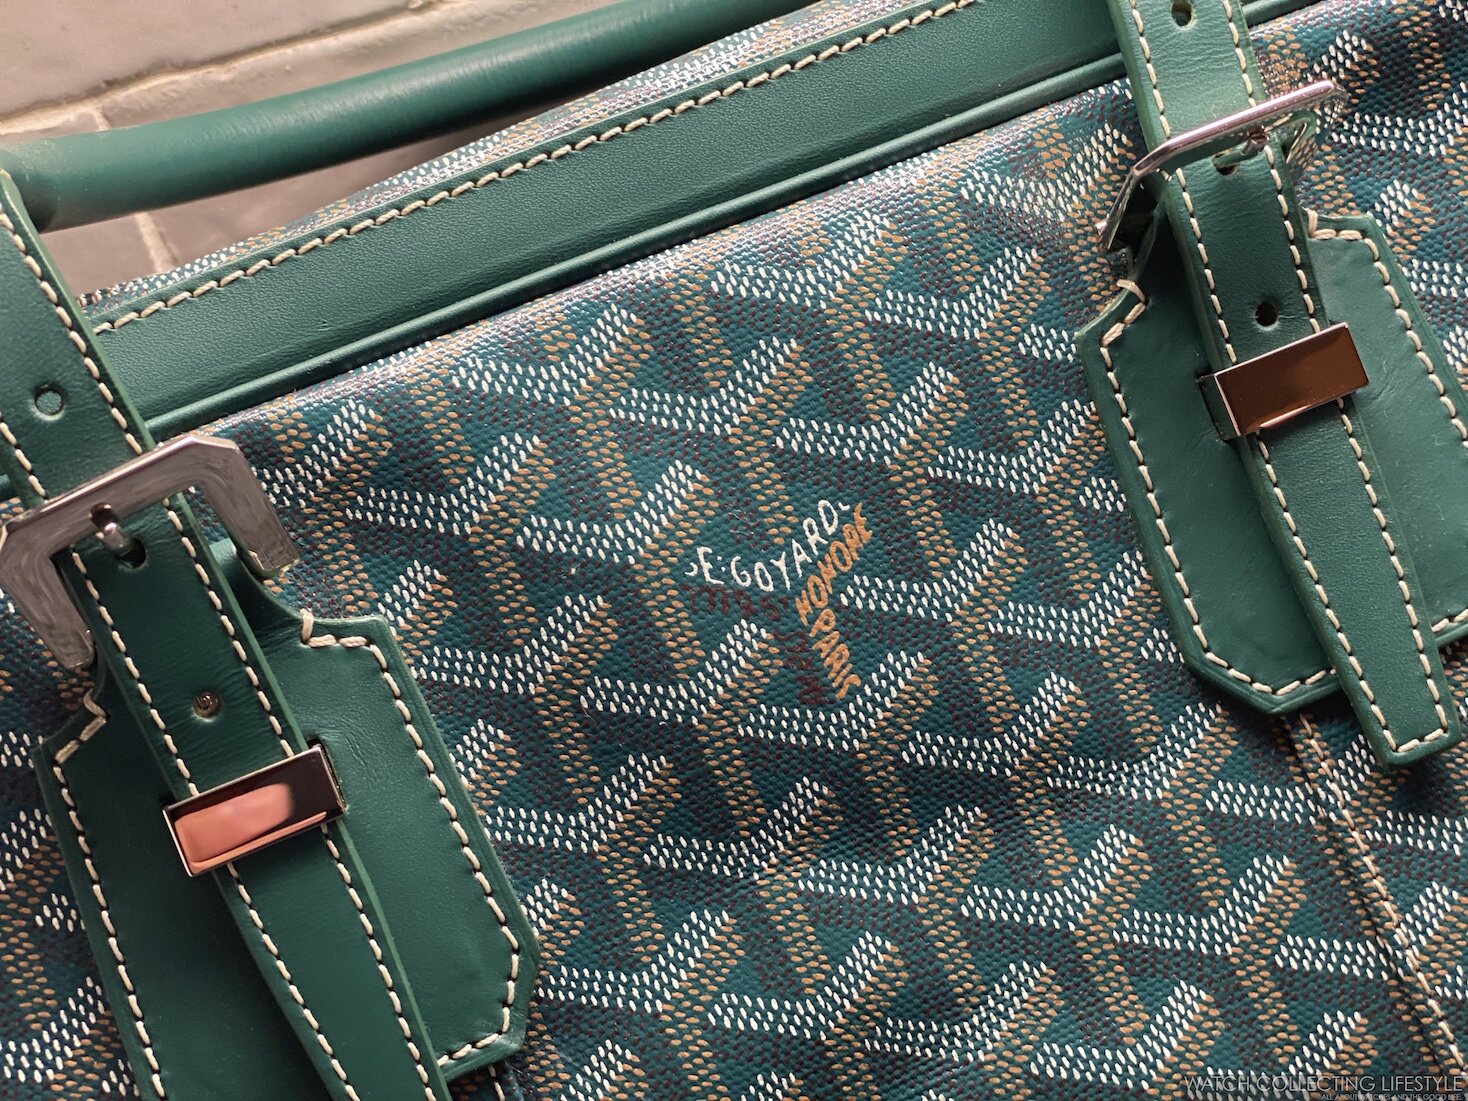 Experience: Goyard Goyardine Ambassade Briefcase. The Color of Money is  Green and so is a Rolex Submariner Hulk. — WATCH COLLECTING LIFESTYLE